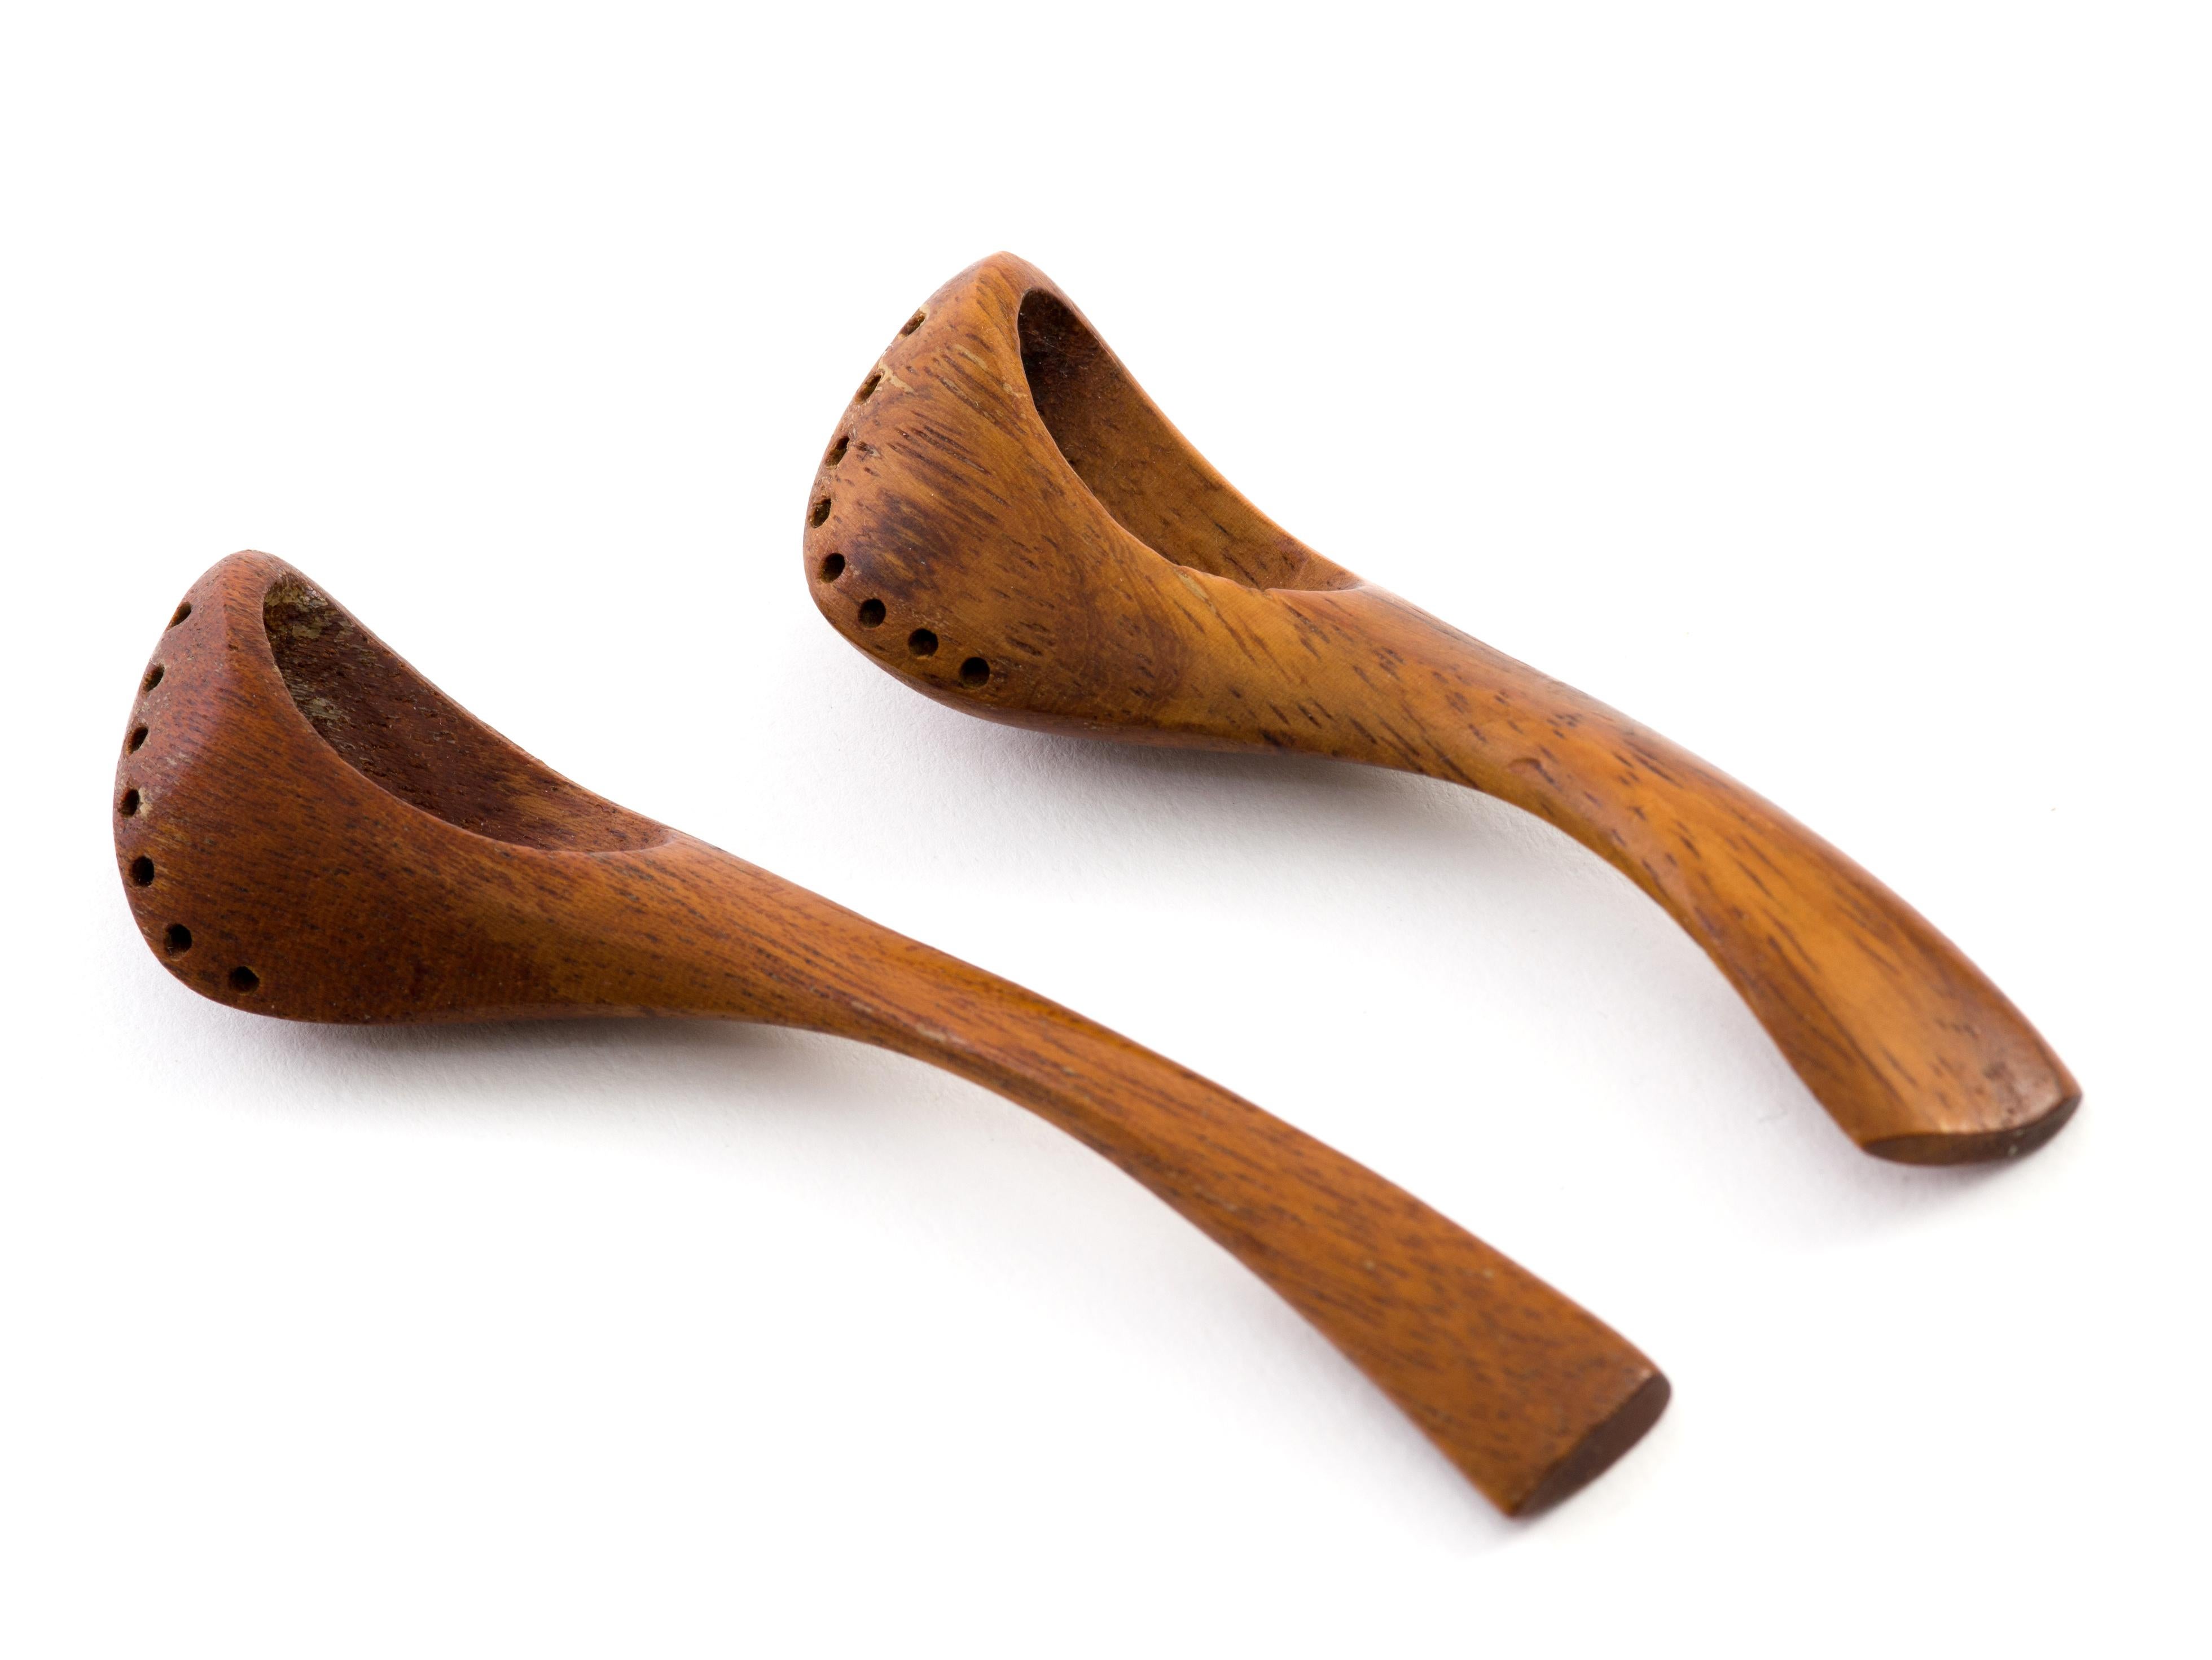 A lovely pair of hand-sculpted spoons for salting by American master woodworker, Emil Milan. An ingenious design that reflects the artist's abundant creativity along with his disdain for any sort of waste (these spoons were often made from scraps